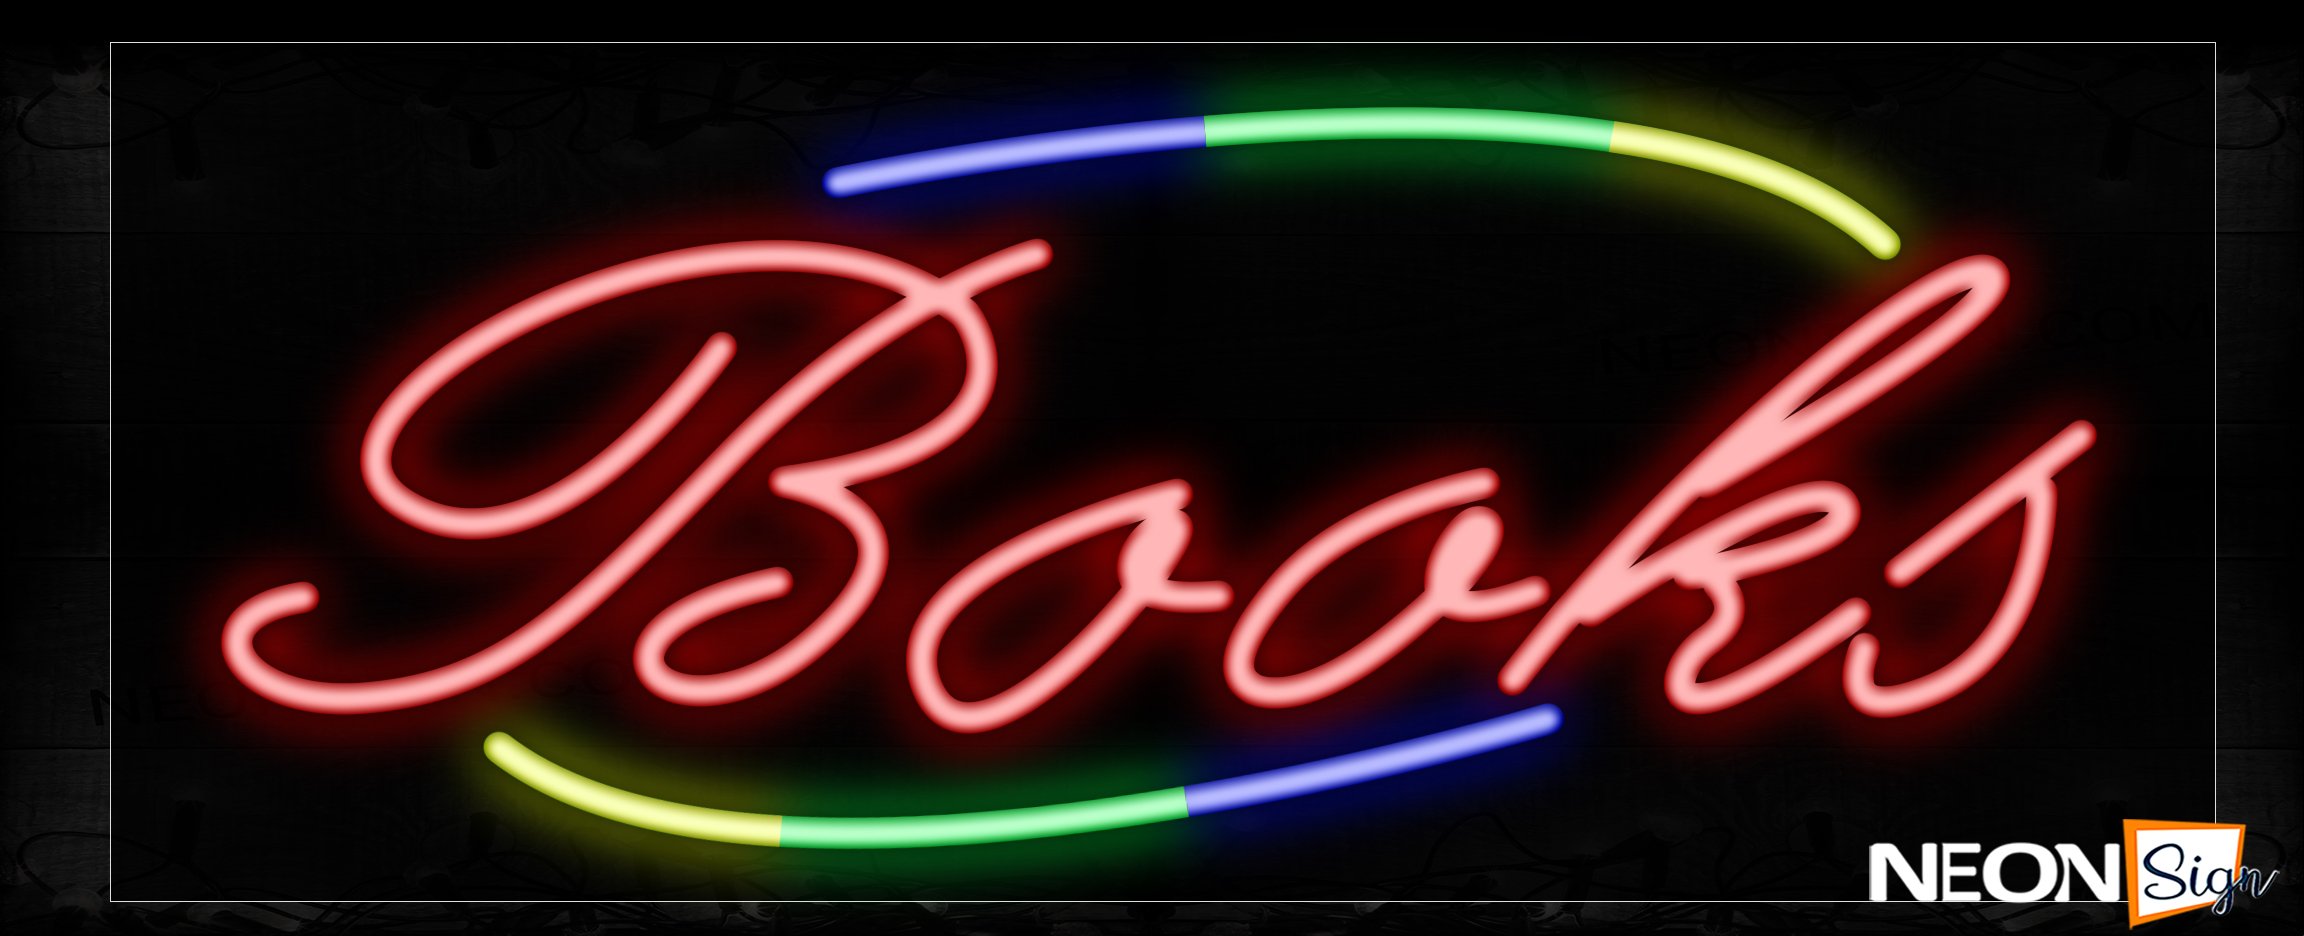 Image of 10745 Books In Red With Colorful Arc Border Neon Signs_13x32 Black Backing